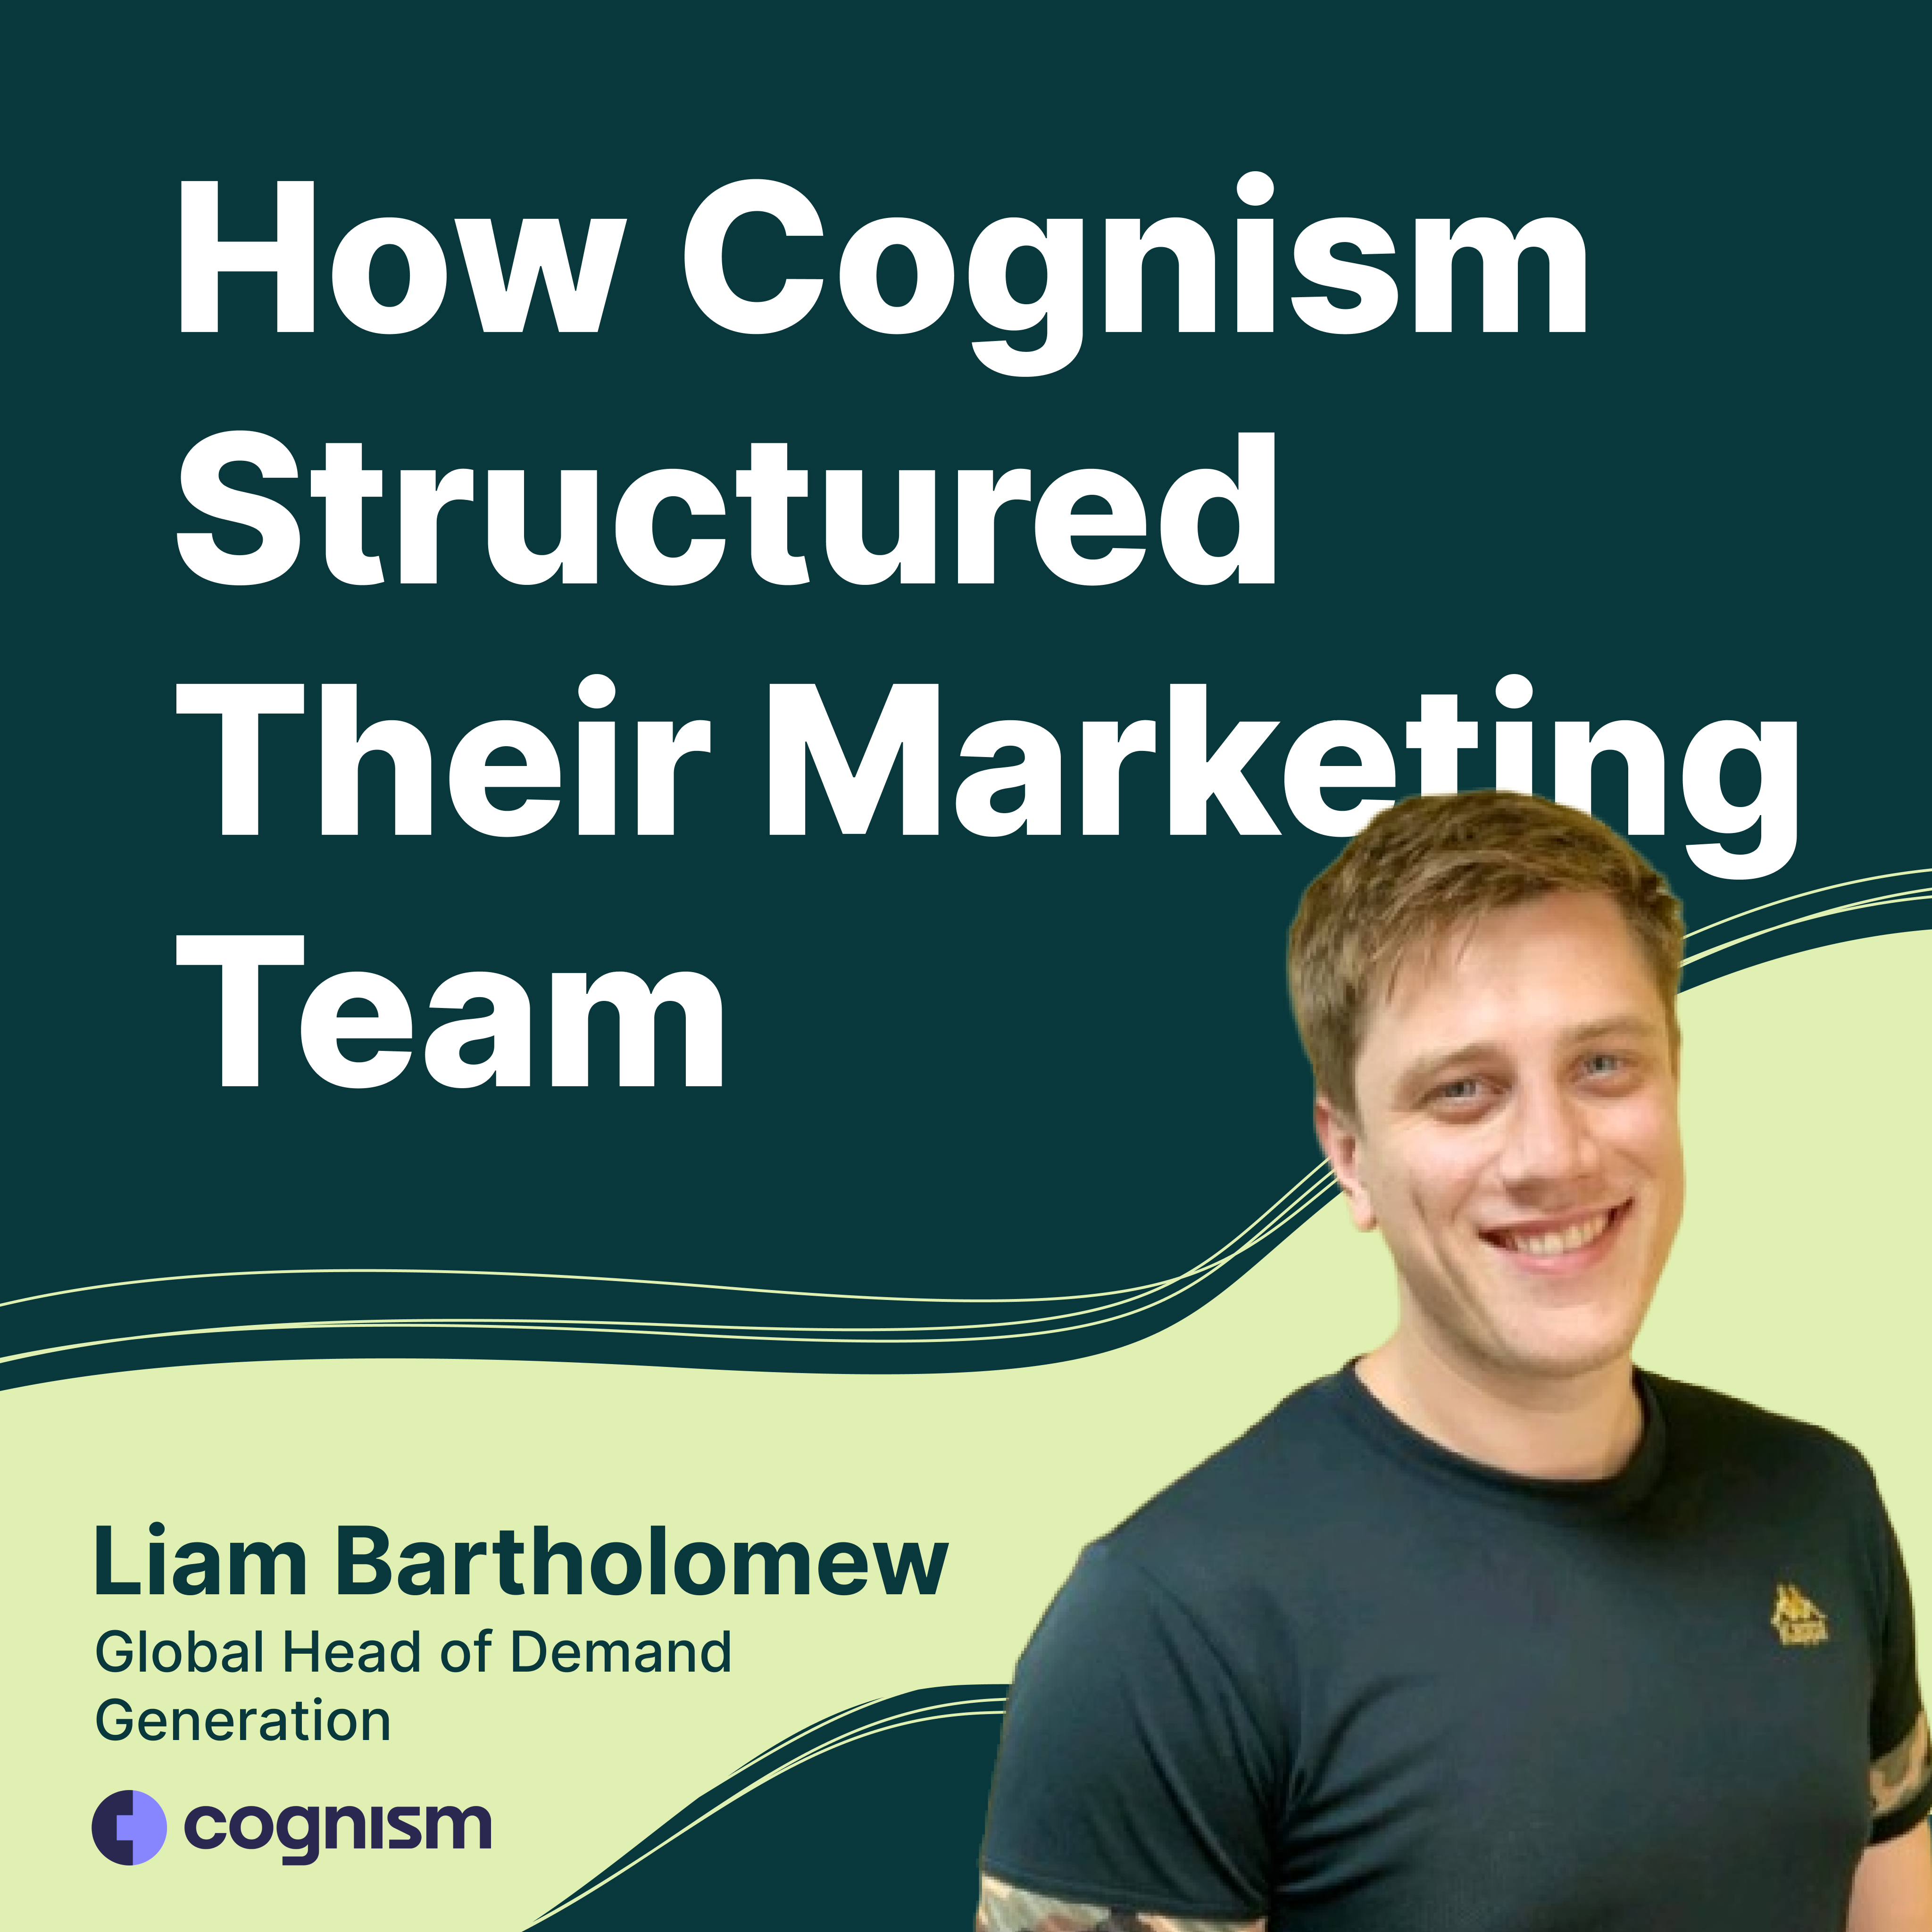 How Is Cognism’s Marketing Team Structured?